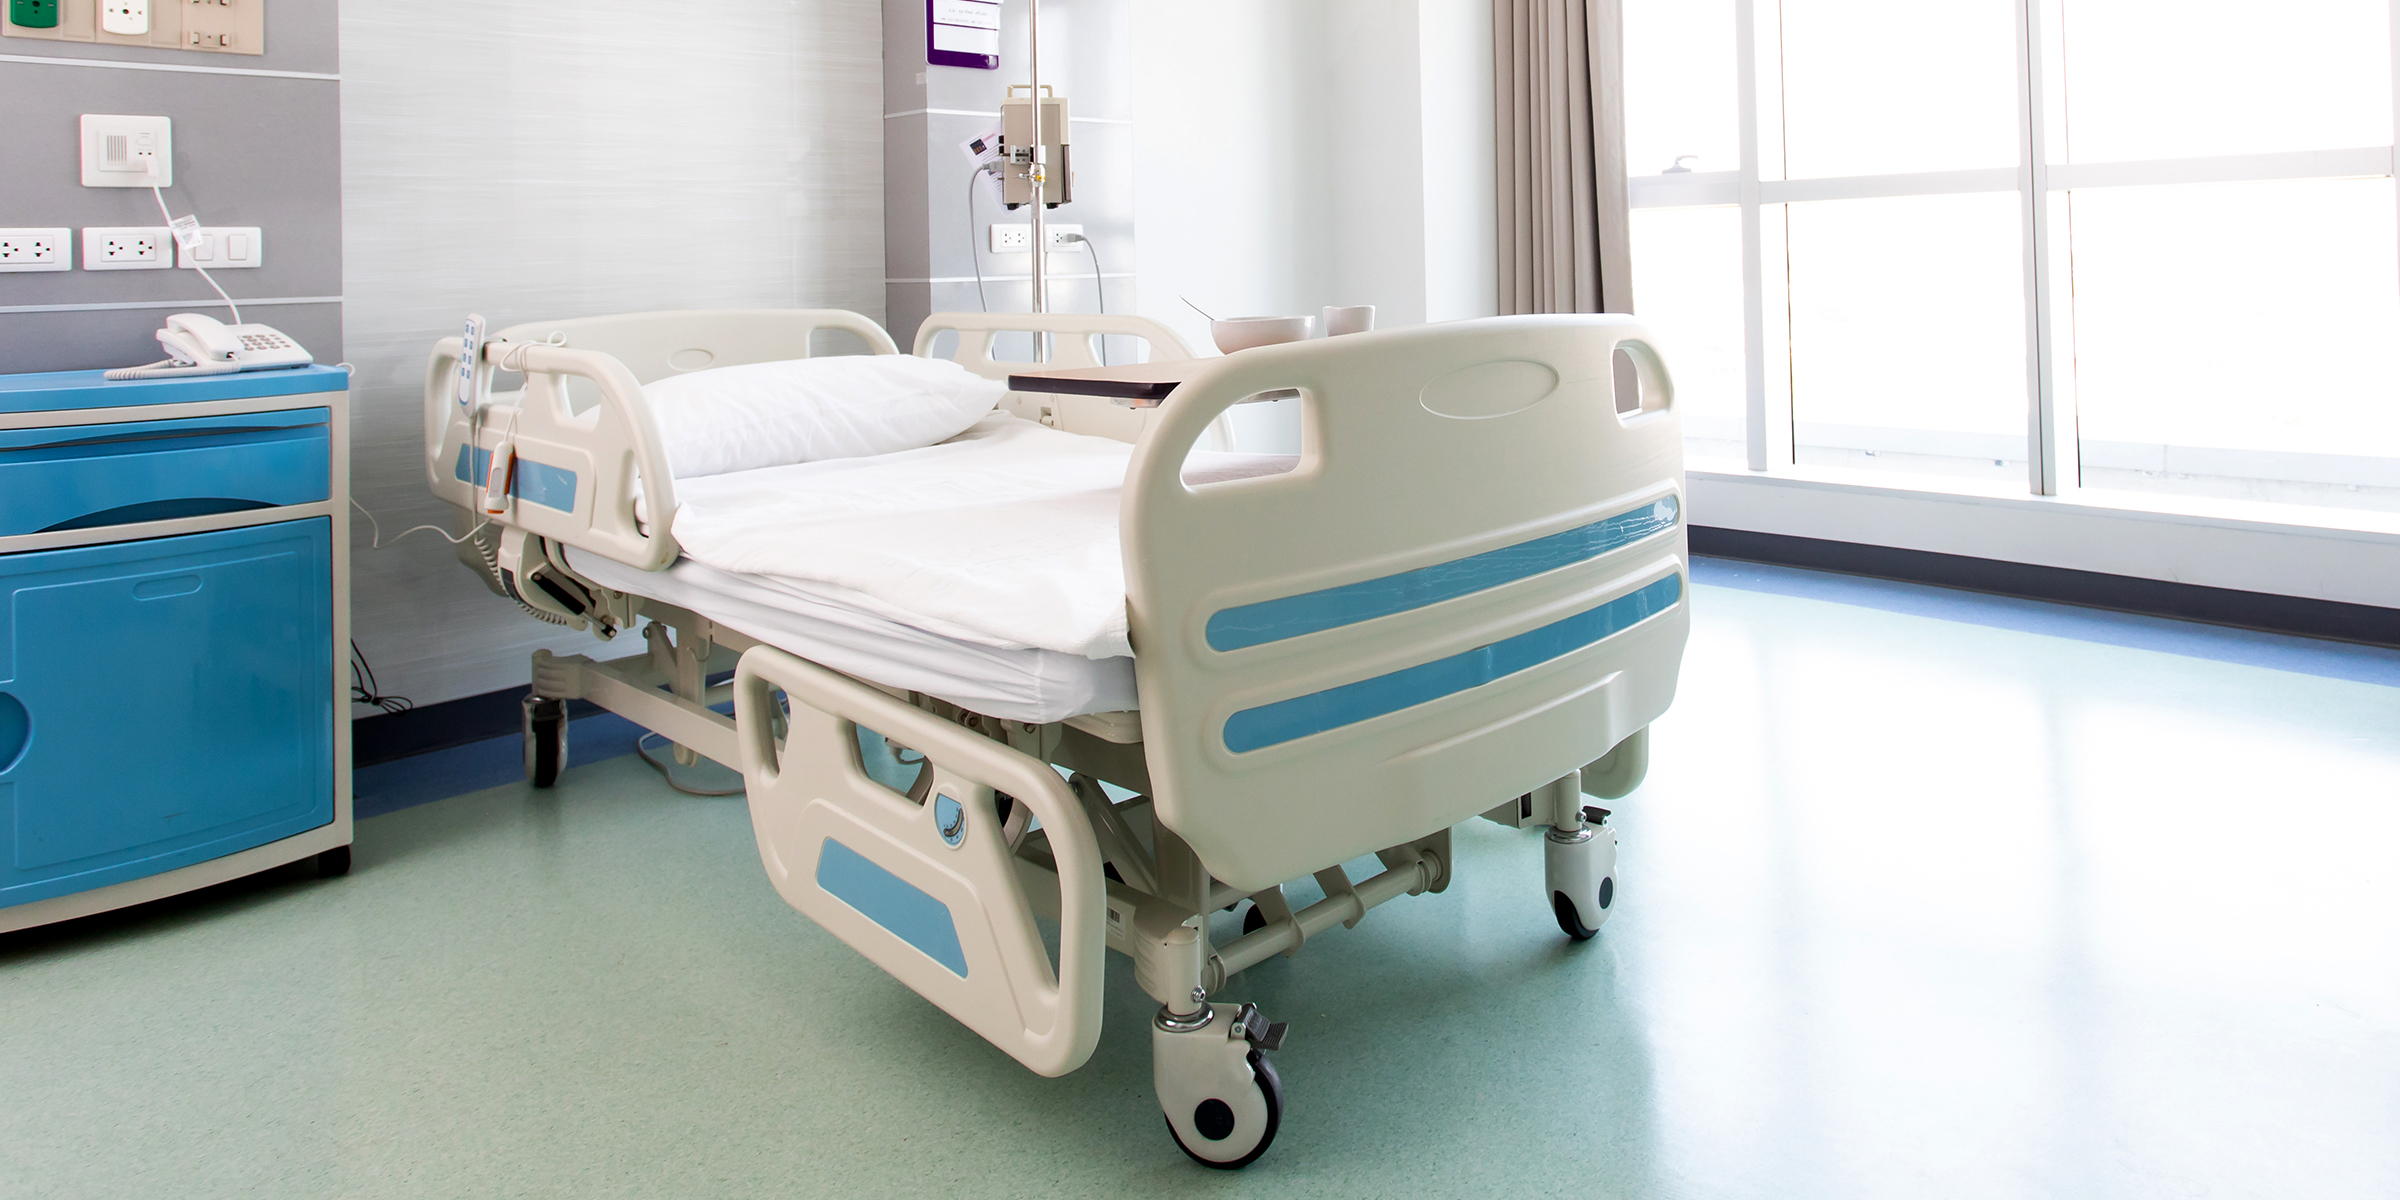 A hospital bed | Source: Shutterstock